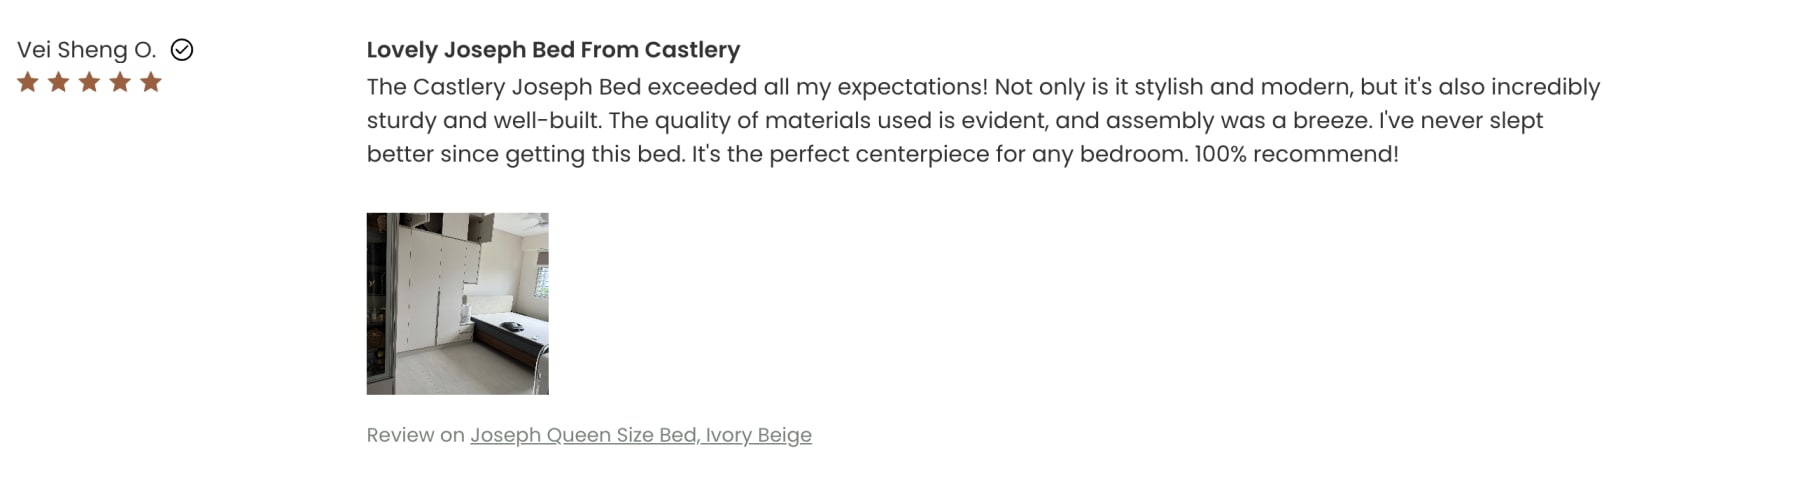 A 5-star review on the Joseph Queen Size Bed in Ivory Beige